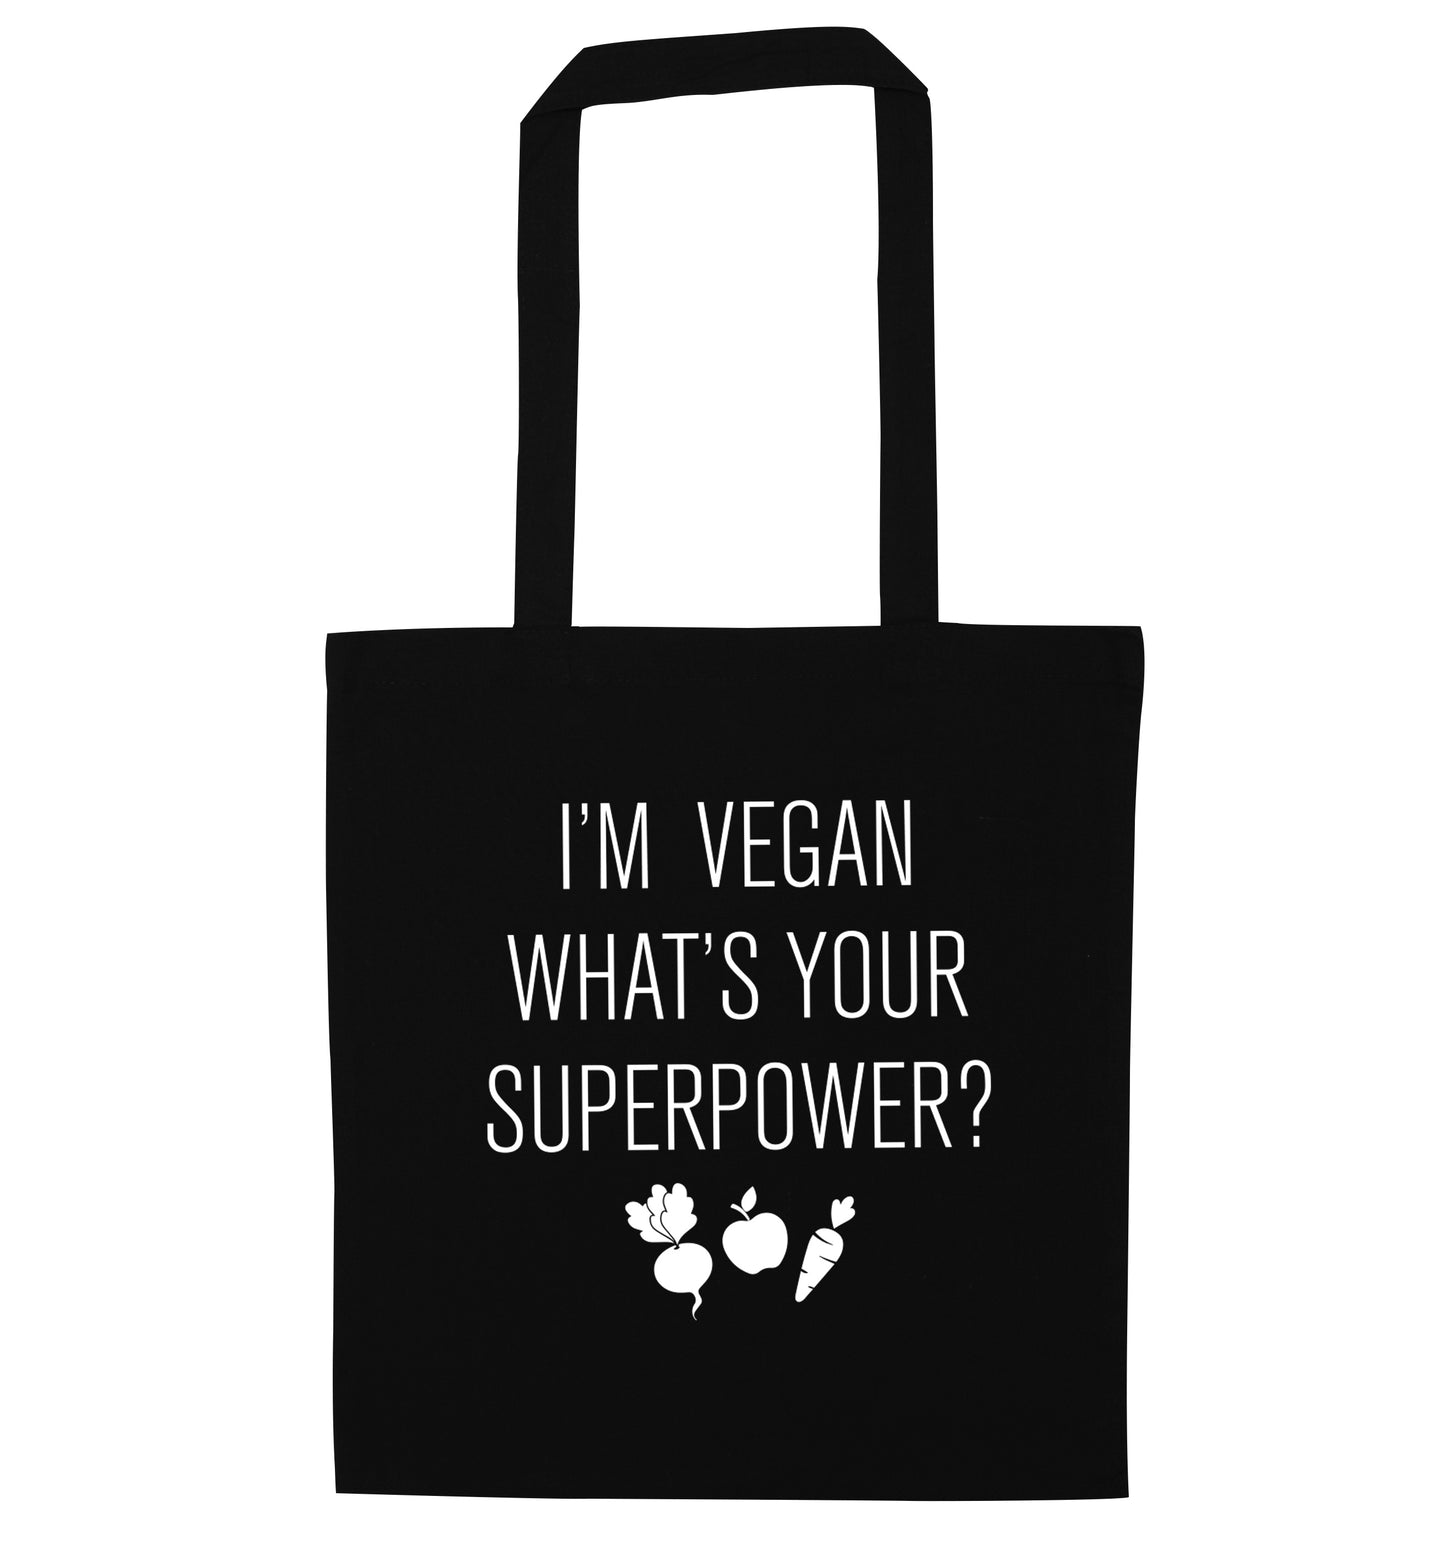 I'm Vegan What's Your Superpower? black tote bag